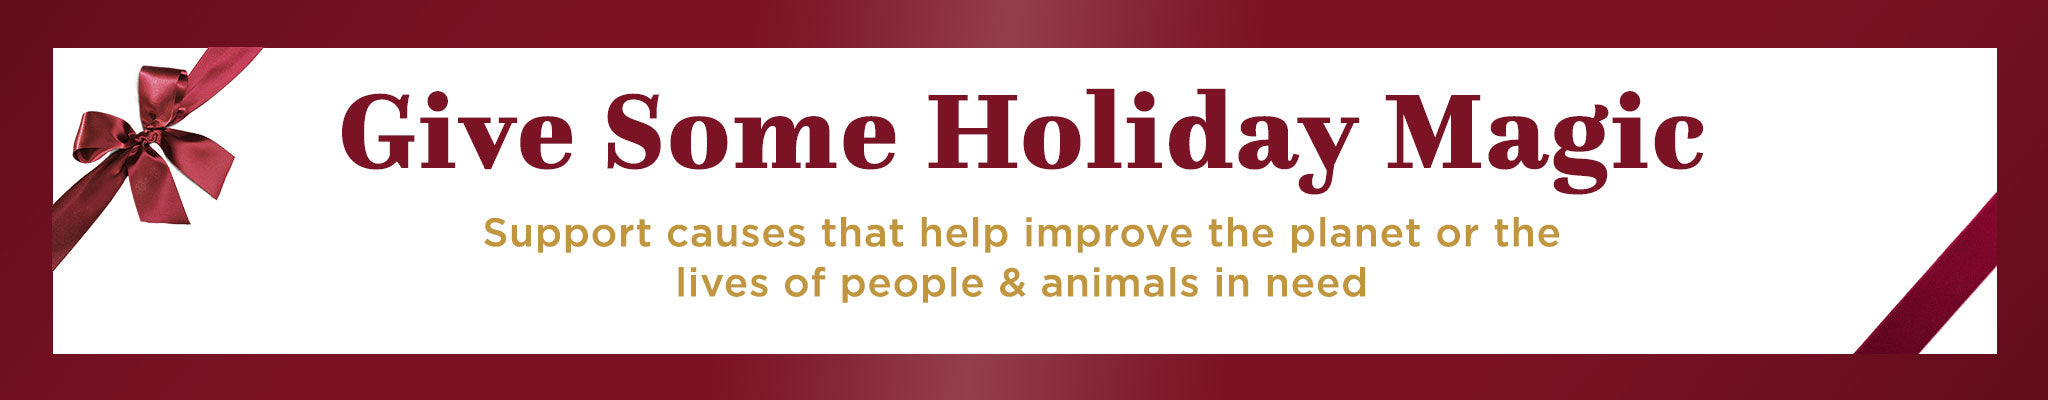 Give Some Holiday Magic  | Support causes that help improve the planet or the lives of people & animals in need